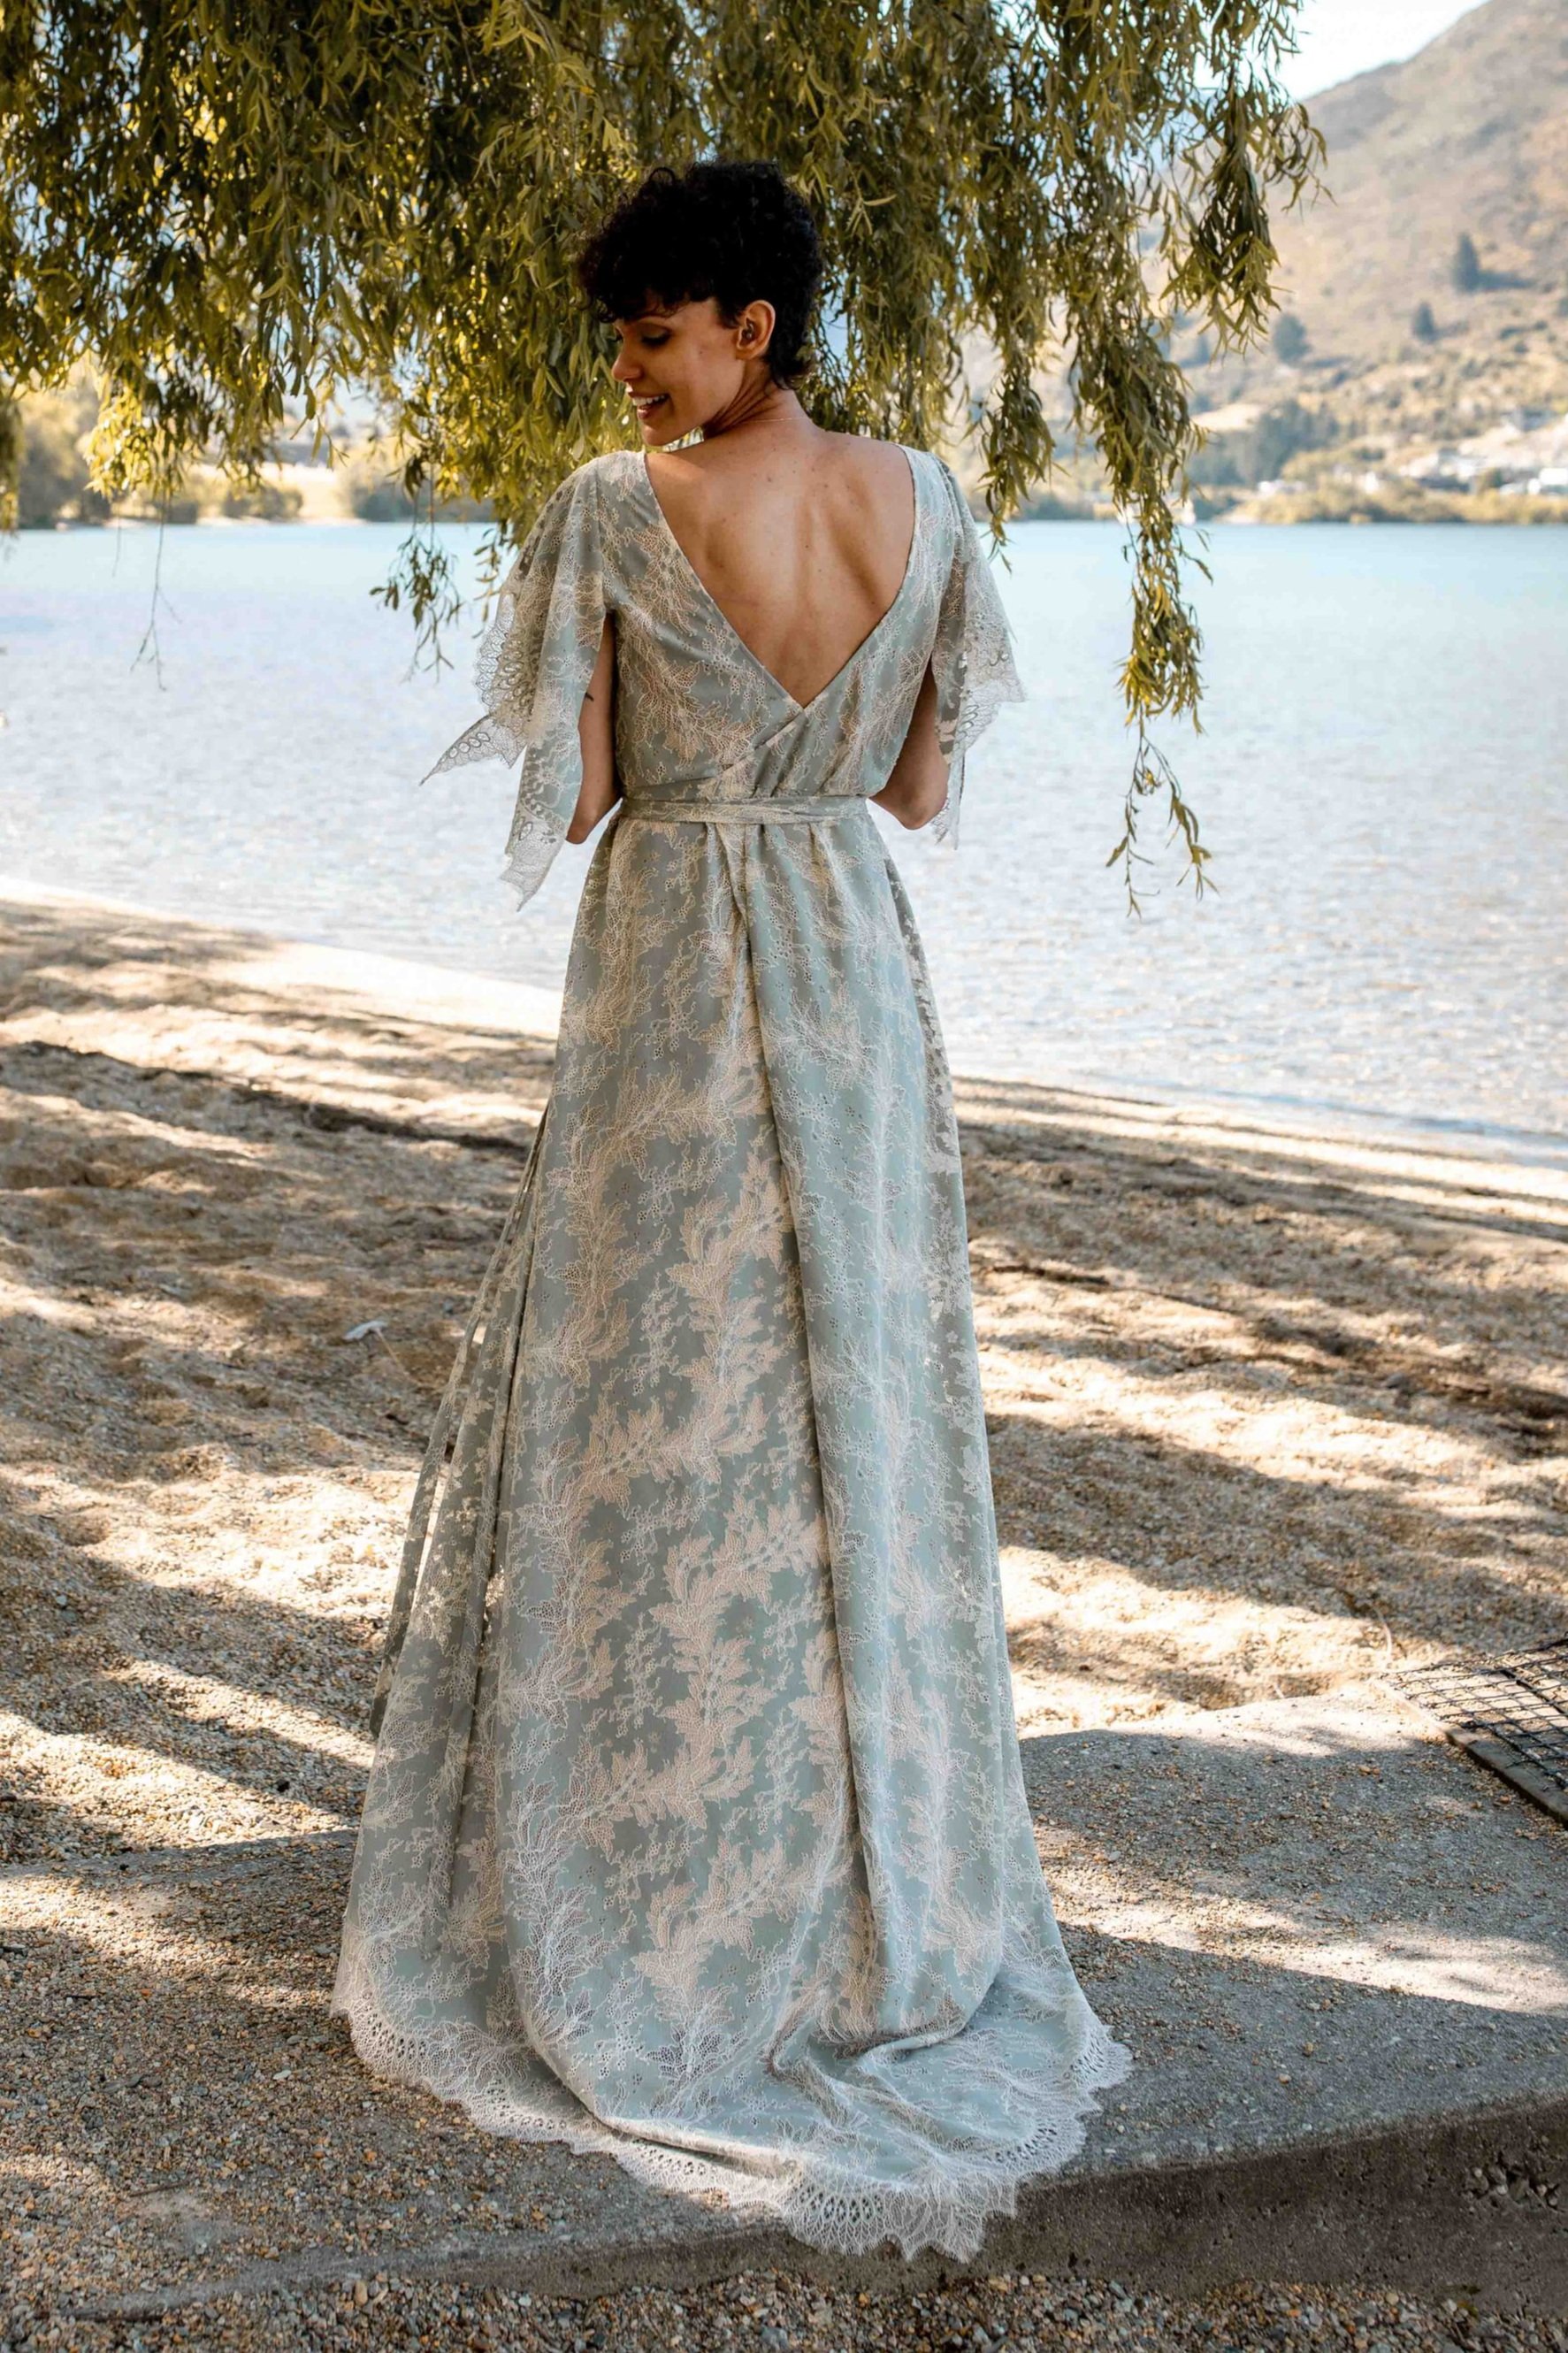 Sofia Wrap Dress in Sage w Nude Slip - Nemo Bridal Couture Queenstown New Zealand 0V9A2317.jpg